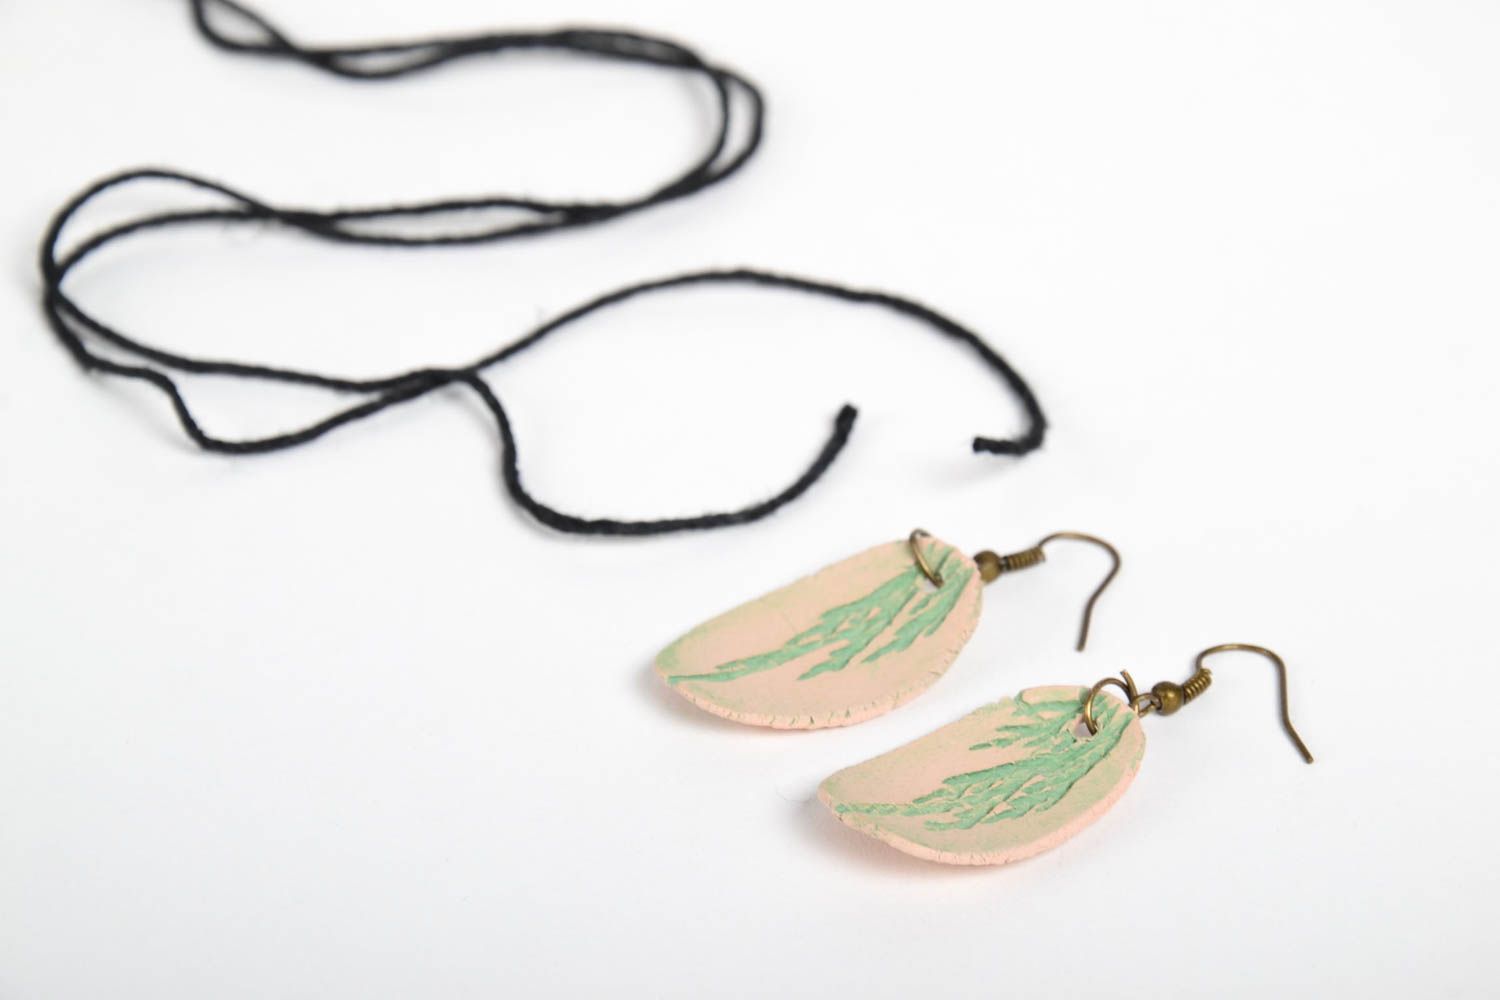 Fashionable dangling earrings handmade natural clay pendant jewelry for women photo 3